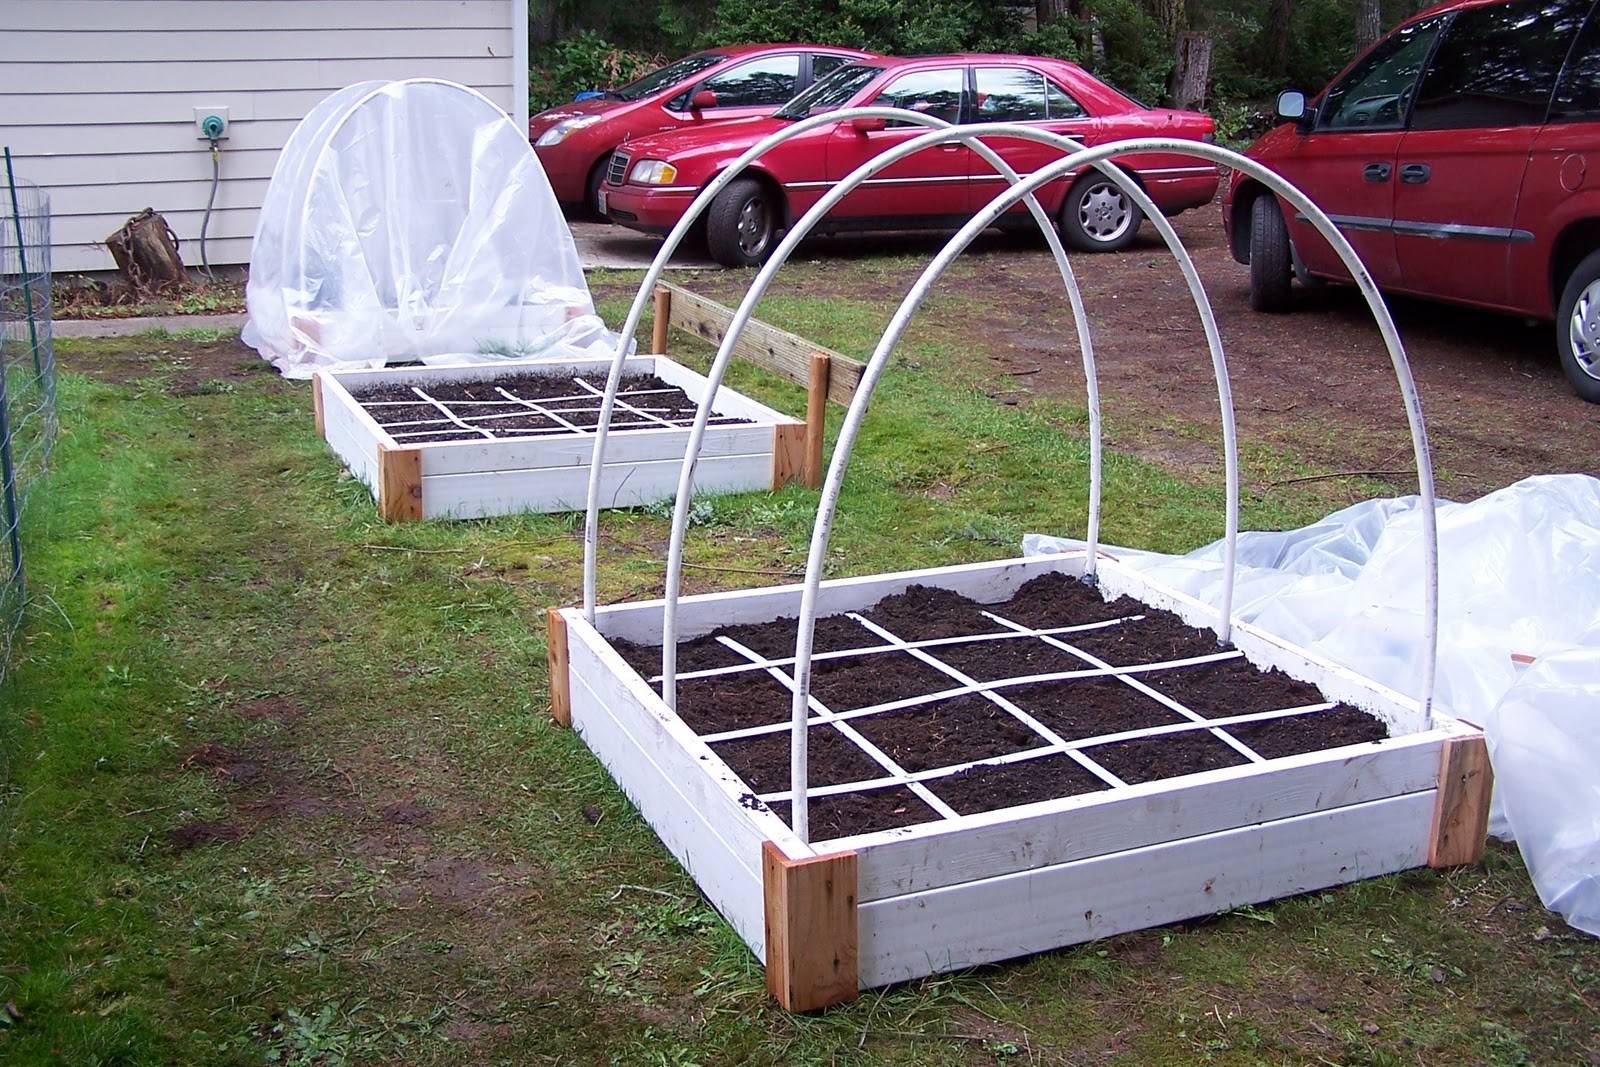 The Square Foot Garden